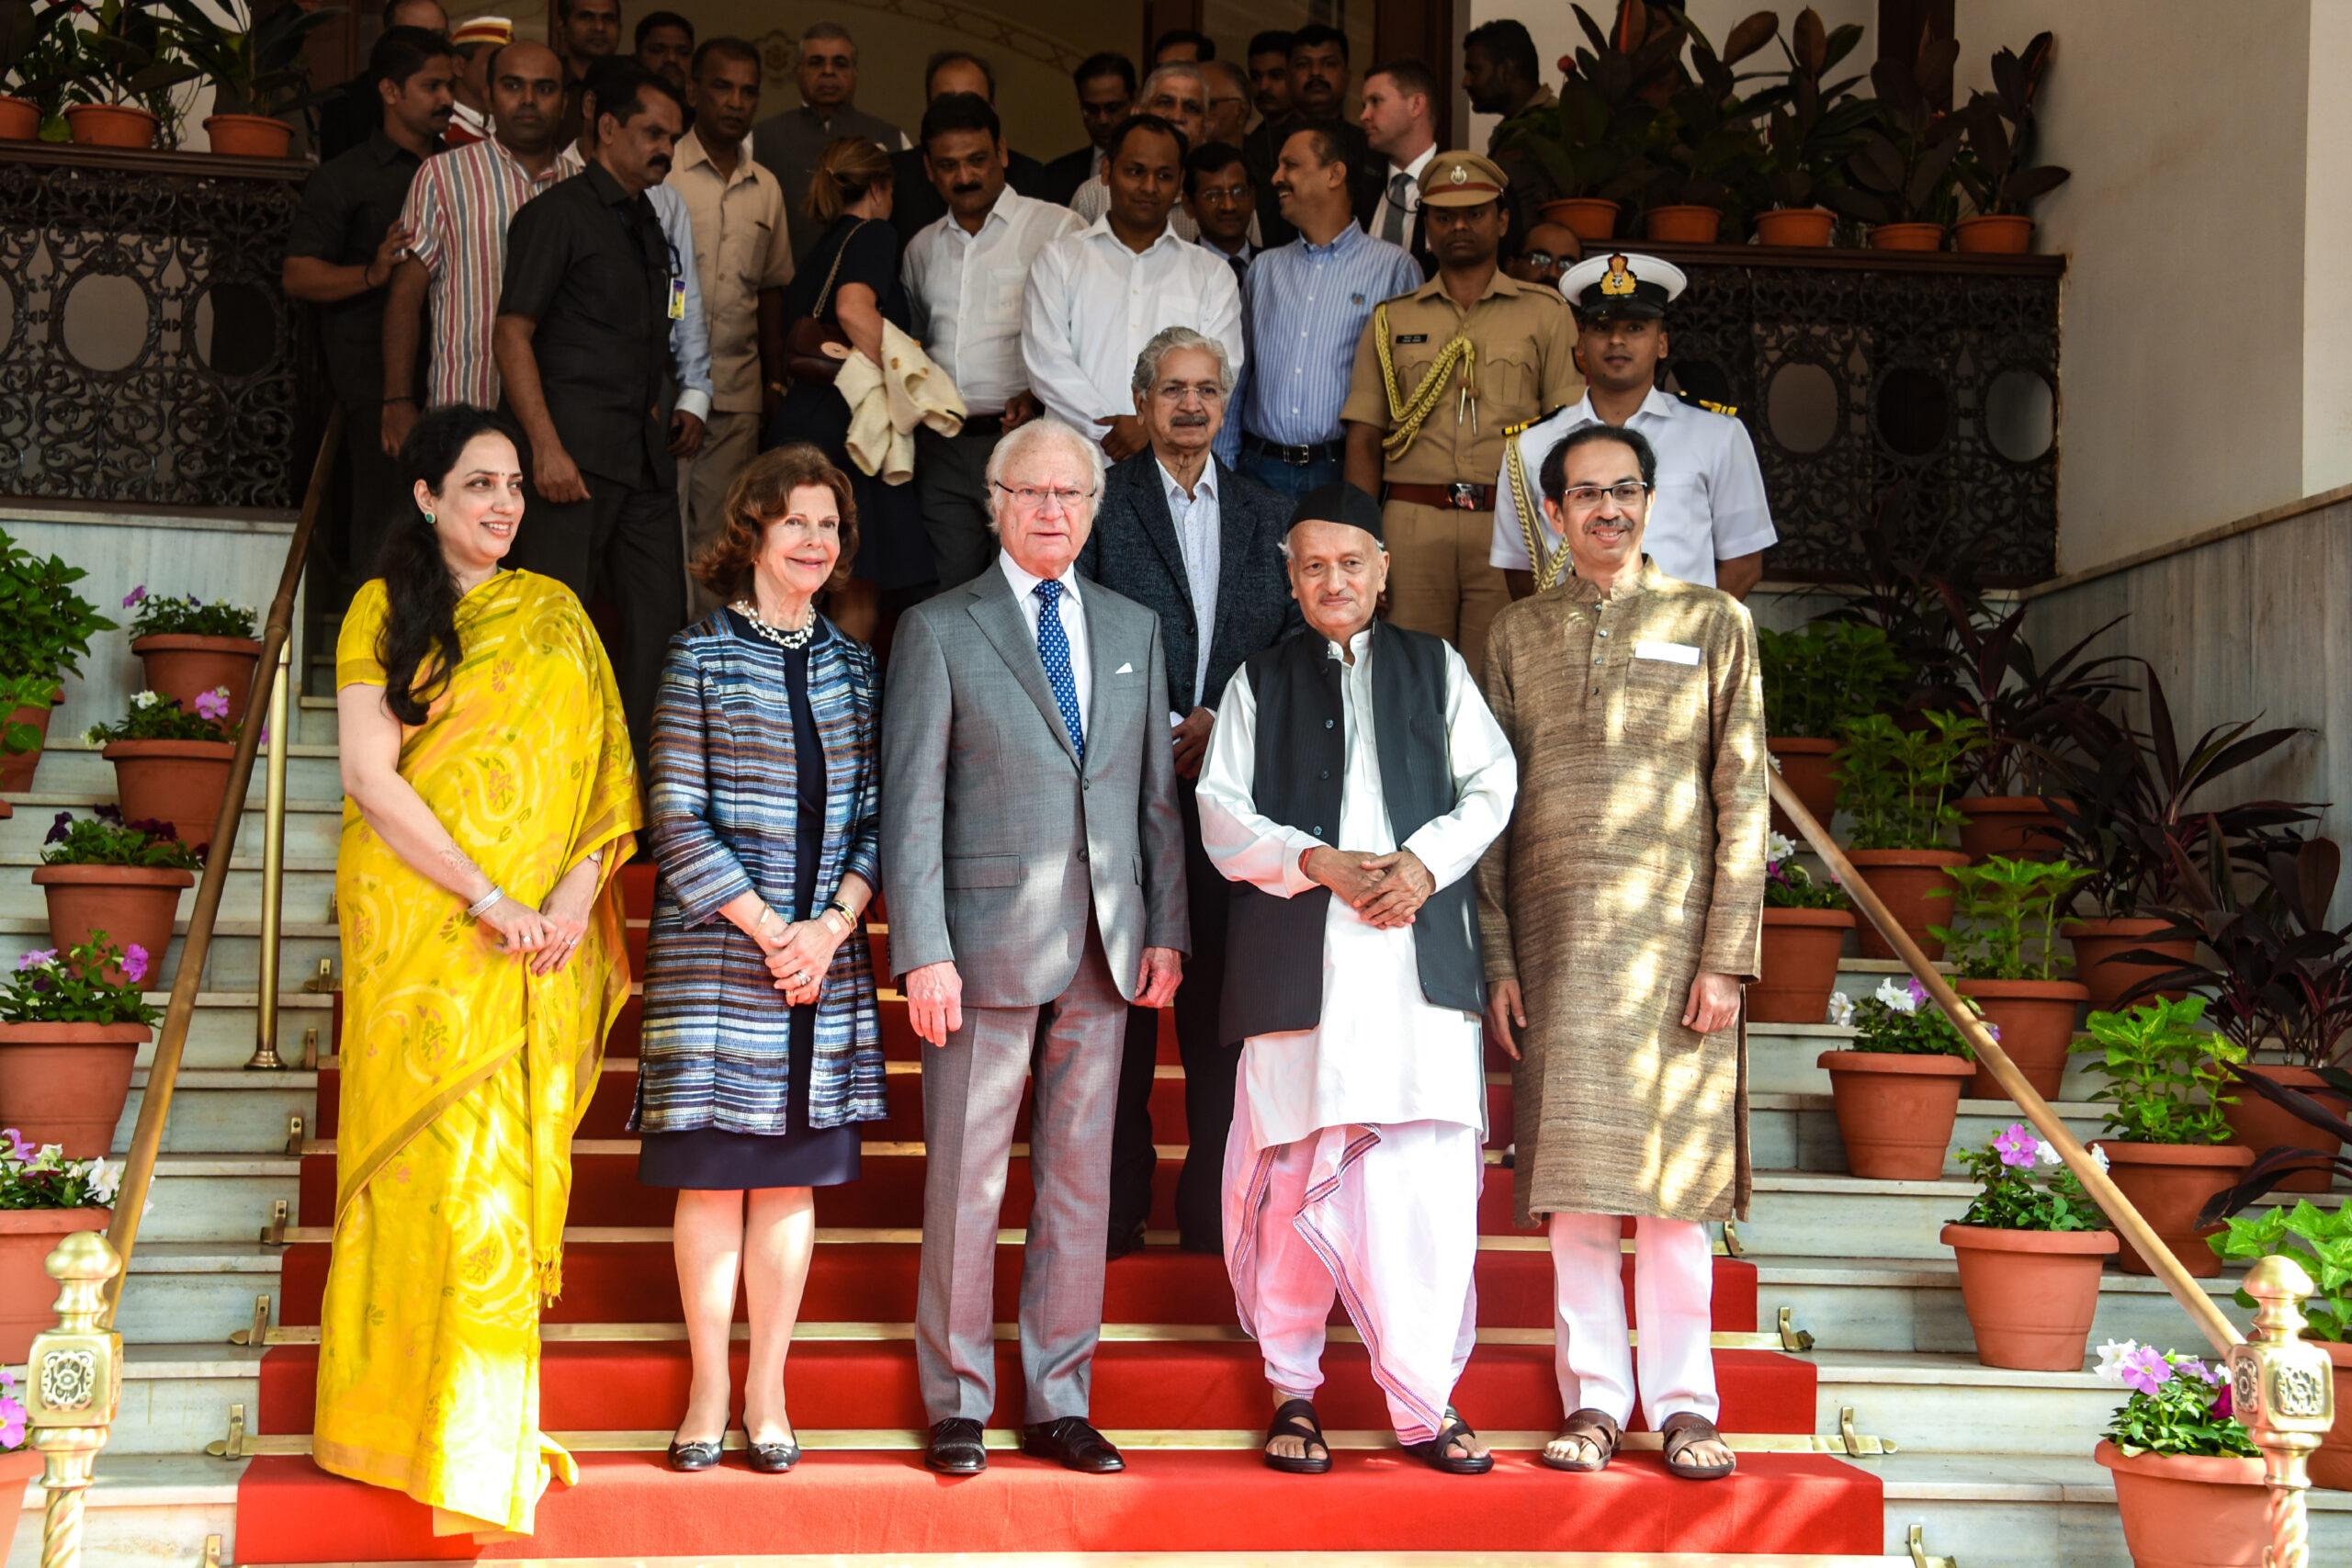 The Swedish king and queen on red carpet together with Indian officials.